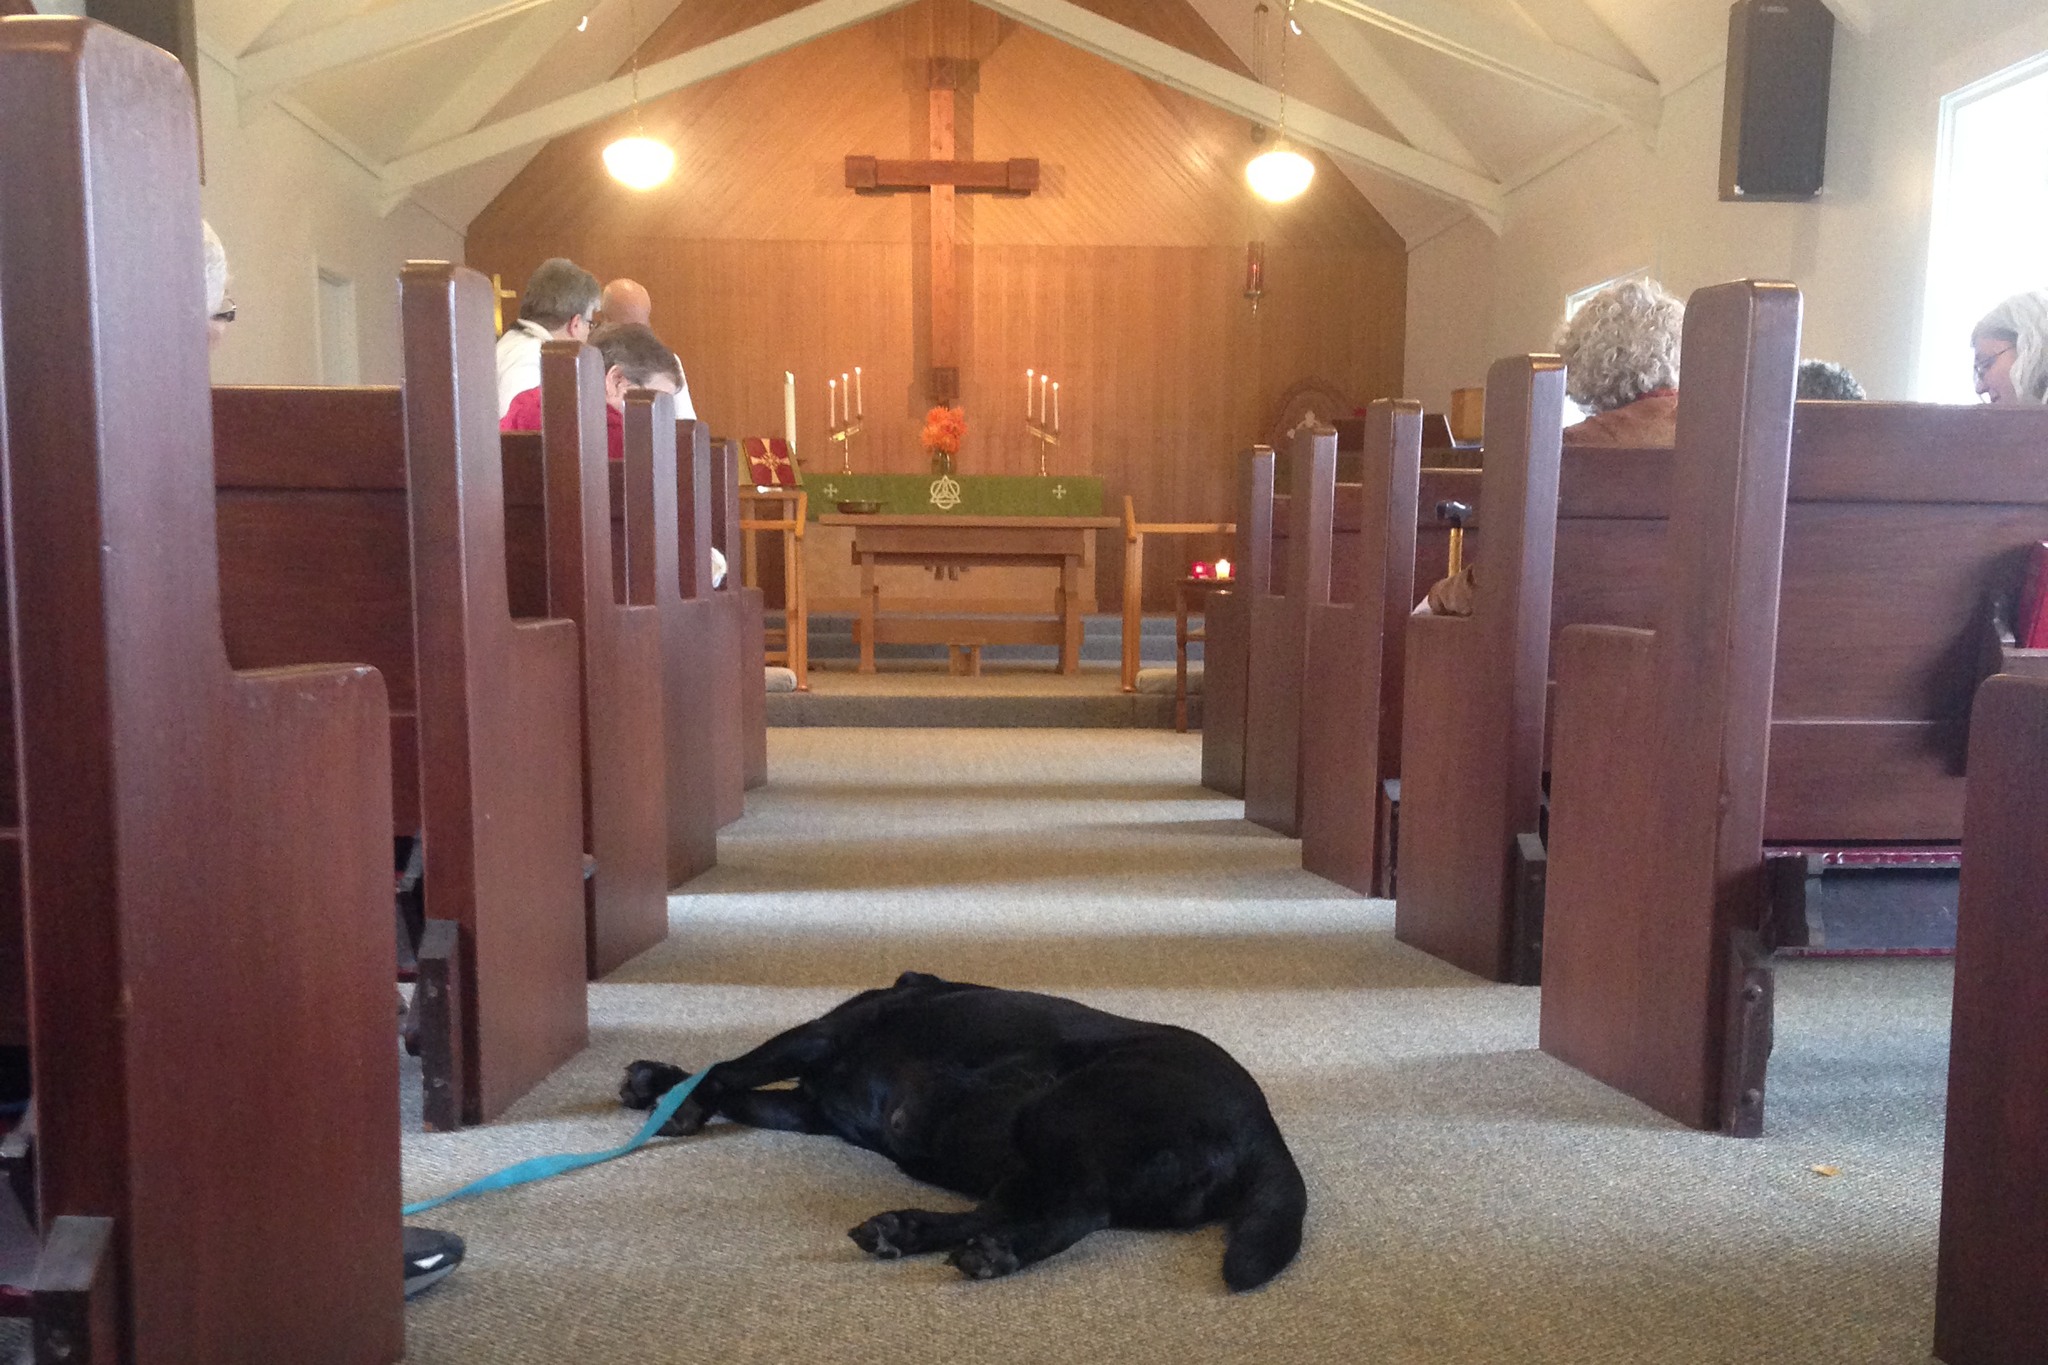 Honey, a 10-year-old black lab, takes a break during the 14th annual blessing of the pets at St. Mark’s Episcopal Church in Montesano. (Stephanie Morton | The Vidette)